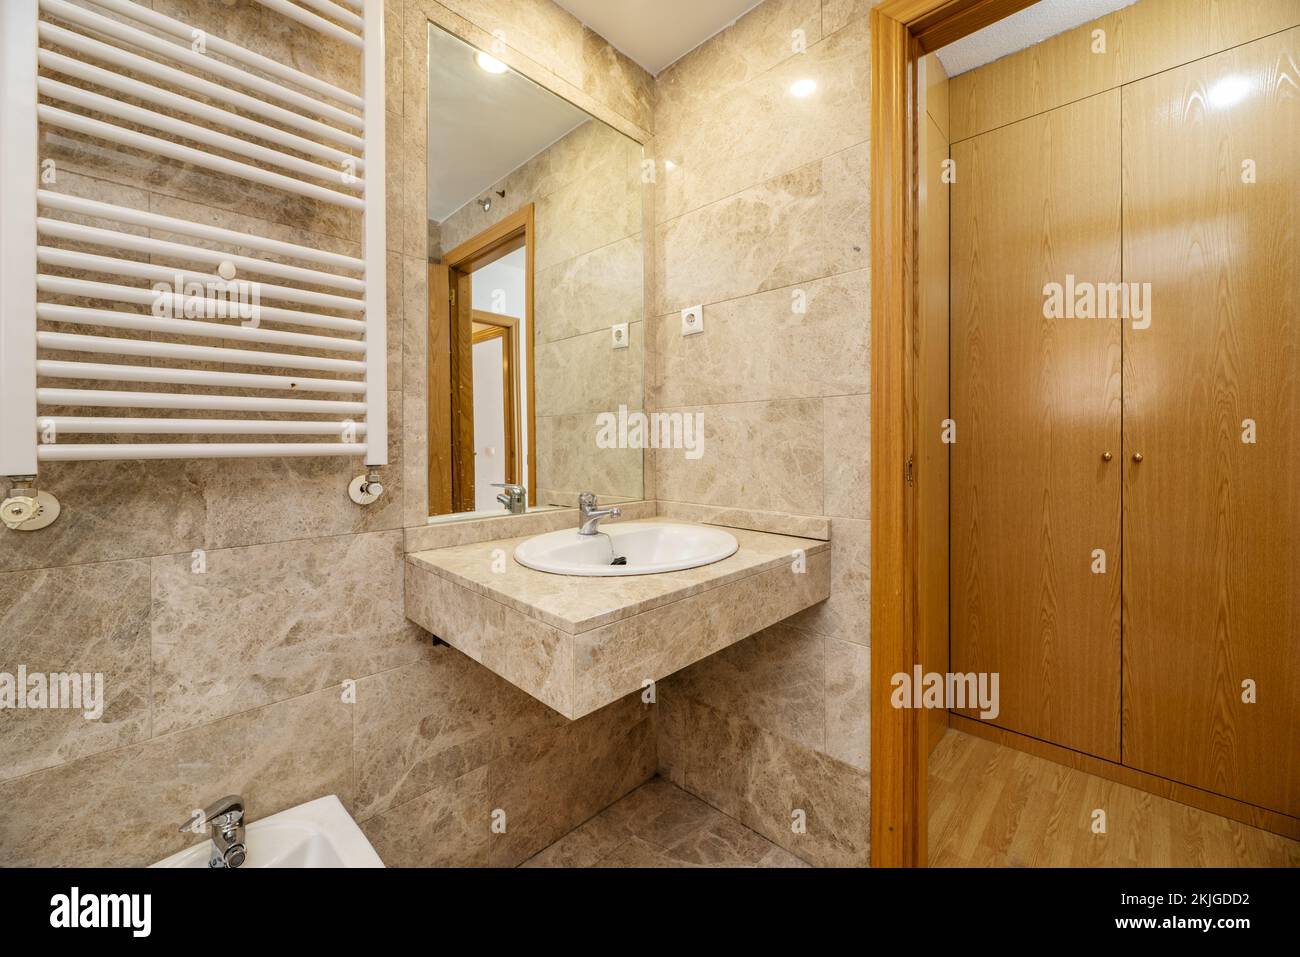 En-suite bathroom with marble countertops, inlaid wall mirror and white heated towel rail and hallway cabinets Stock Photo